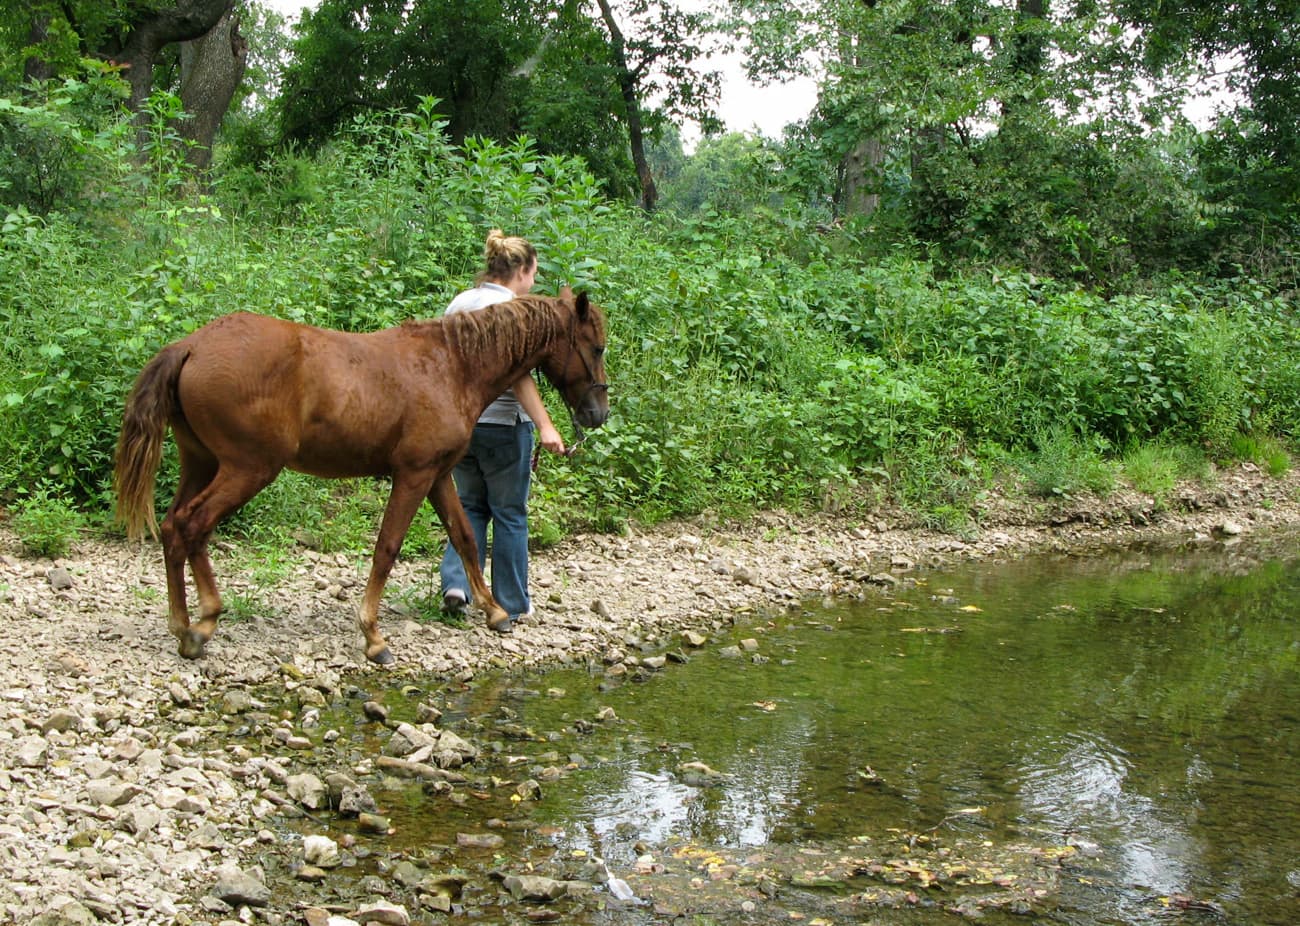 Hand walking your young horse down trails can build confidence and your bond. Much of the work of early training is exposing your horse to many new experiences, like this filly being led along a creek bed in preparation for trail riding one day.